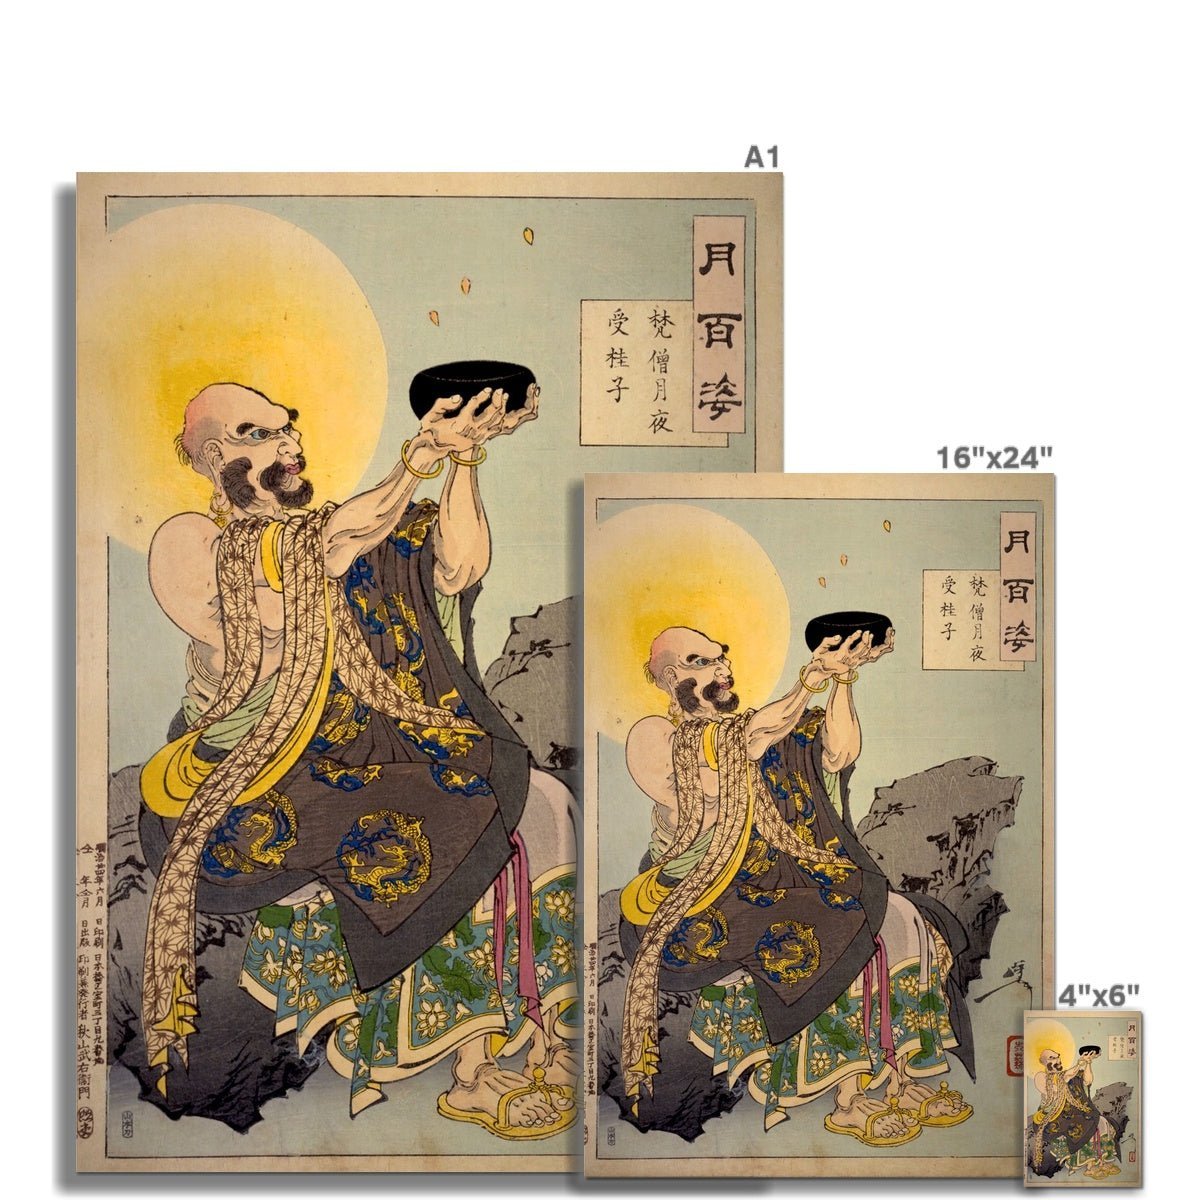 giclee One Hundred Aspects of the Moon: A Buddhist Monk Receives Cassia Seeds On A Moonlit Night Fine Art Print